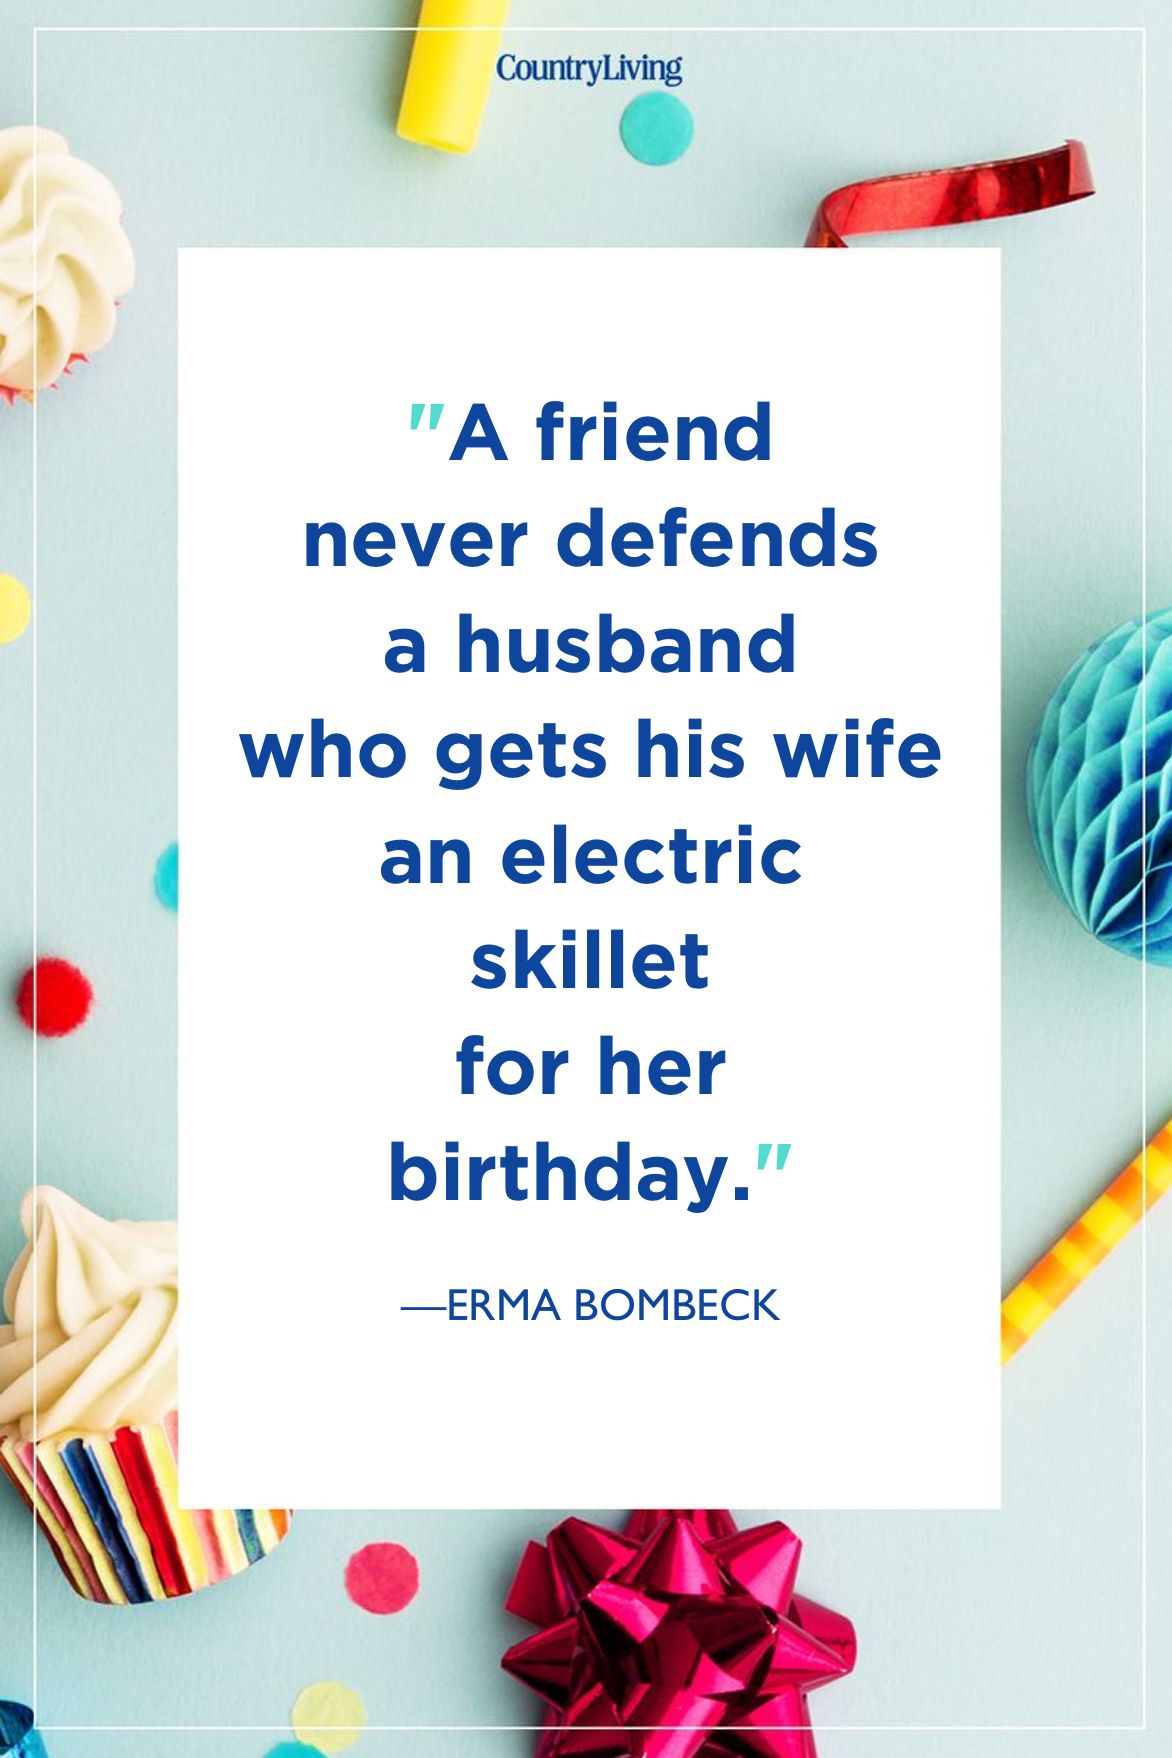 35 Best Birthday Quotes - Happy Birthday Wishes, Quotes, and Messages